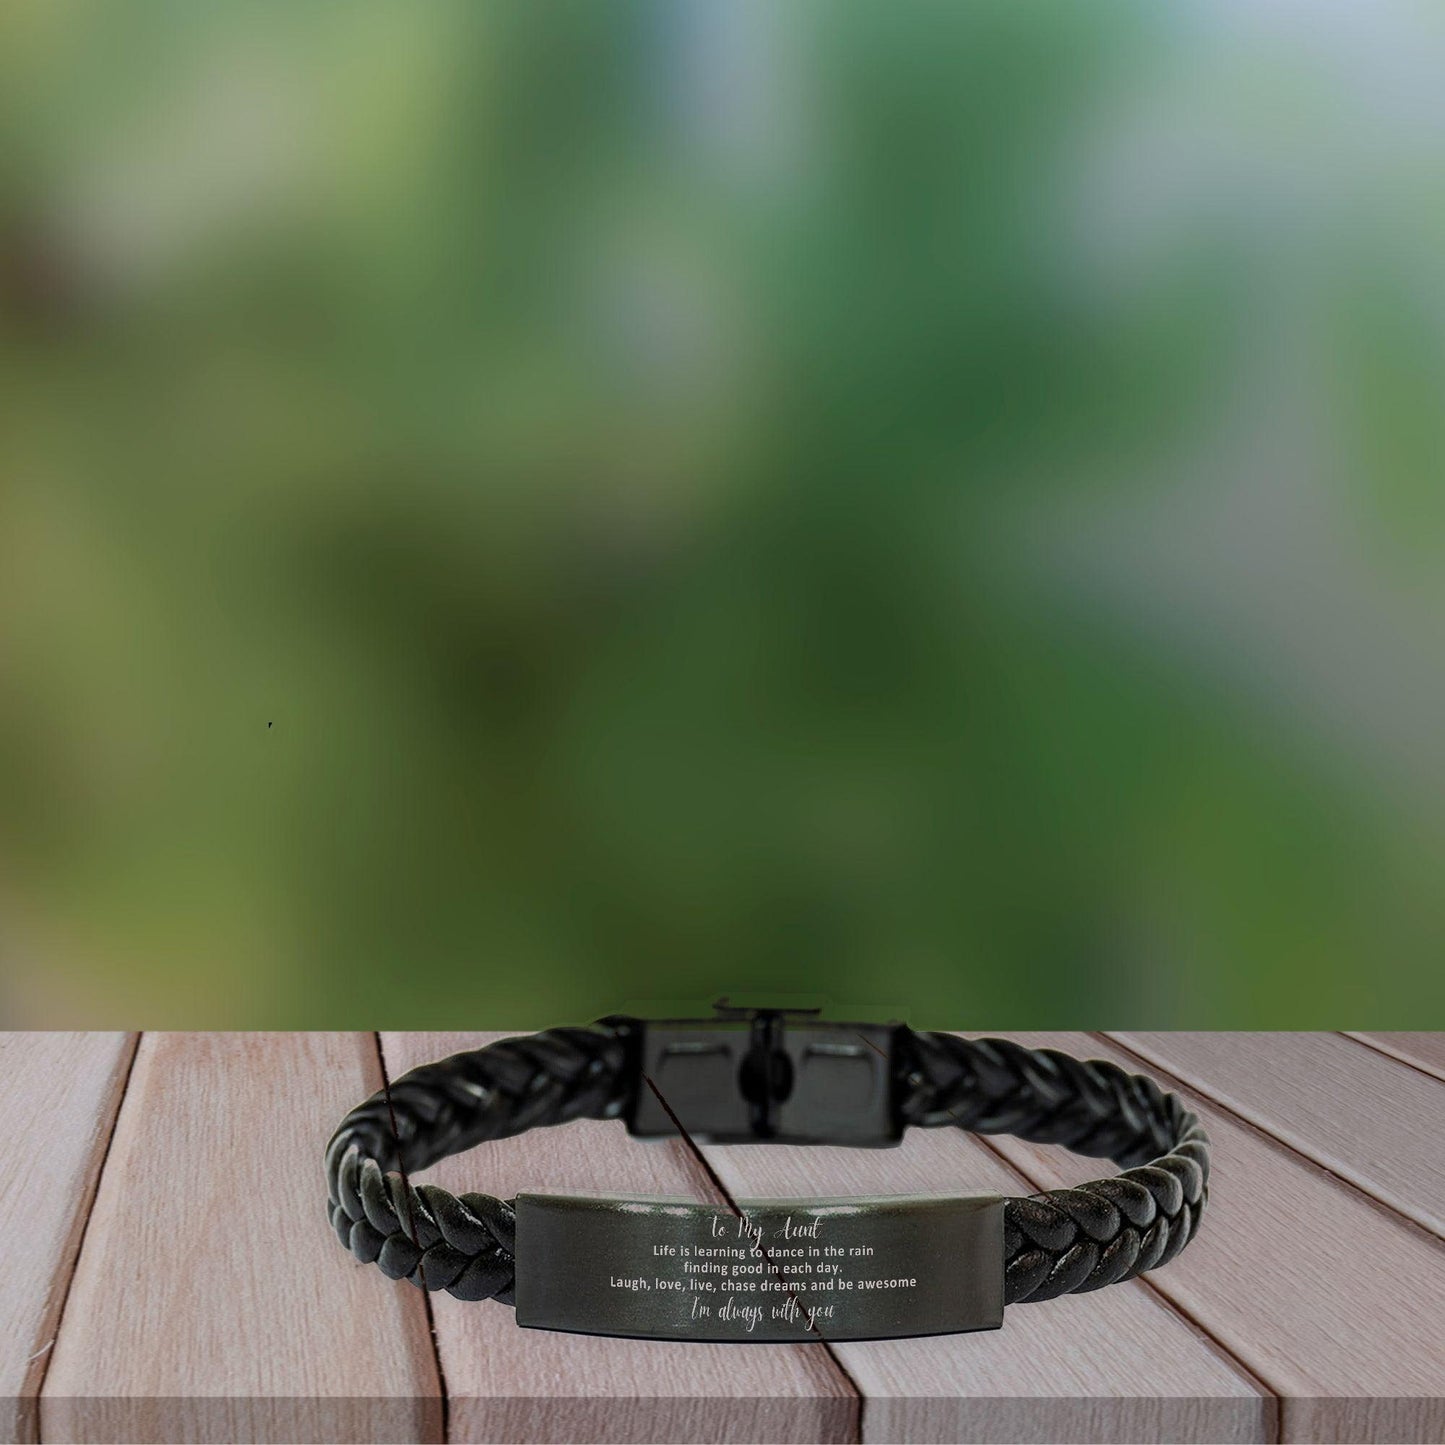 Aunt Christmas Perfect Gifts, Aunt Braided Leather Bracelet, Motivational Aunt Engraved Gifts, Birthday Gifts For Aunt, To My Aunt Life is learning to dance in the rain, finding good in each day. I'm always with you